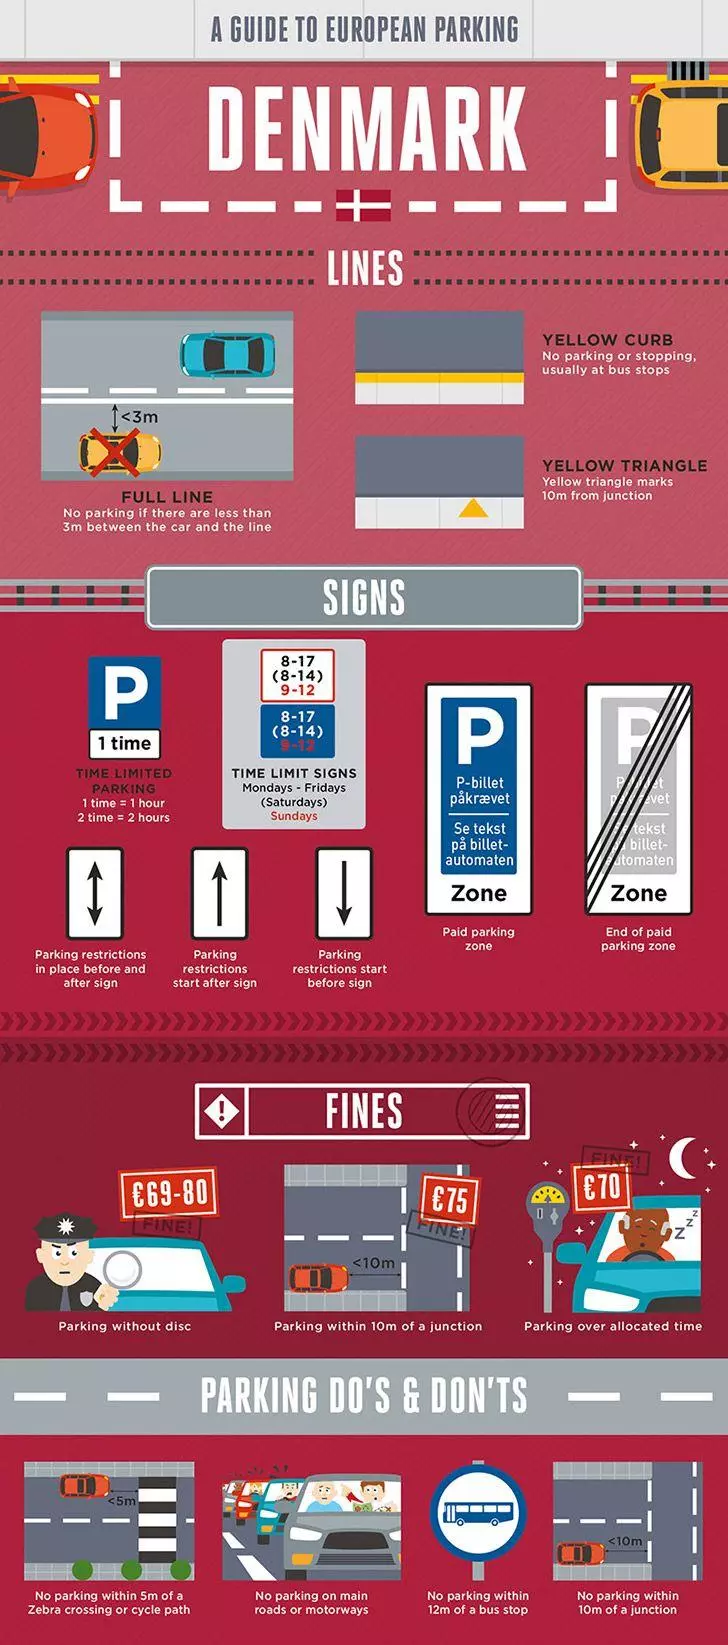 Parking rules